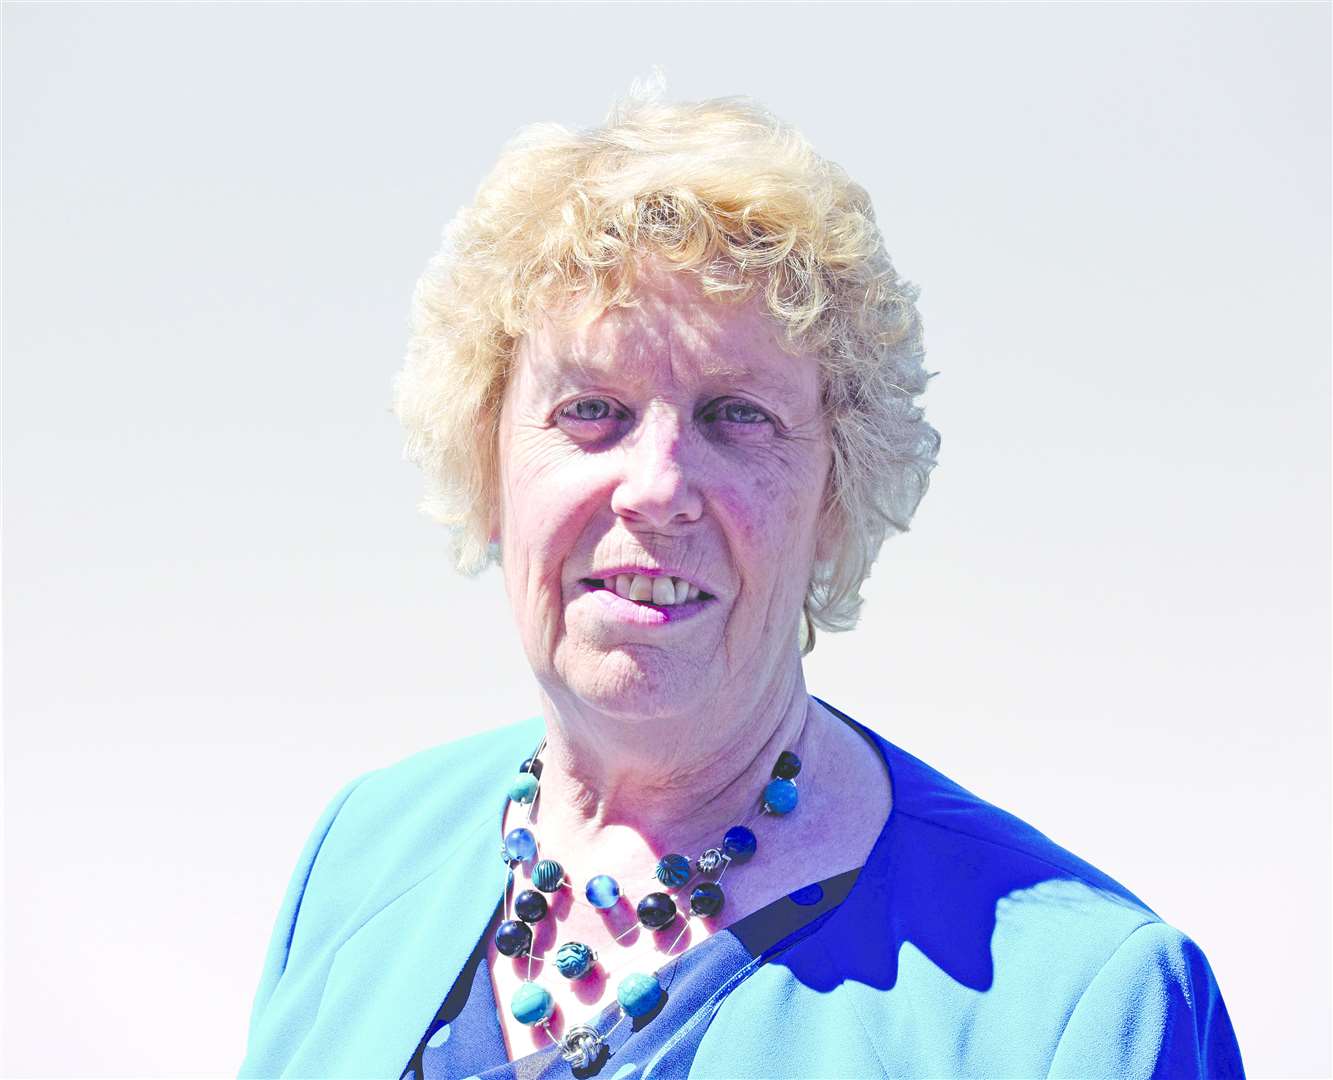 Cllr Hazel Browne, Medway Council tabled the motion to bring in restrictions on fireworks displays